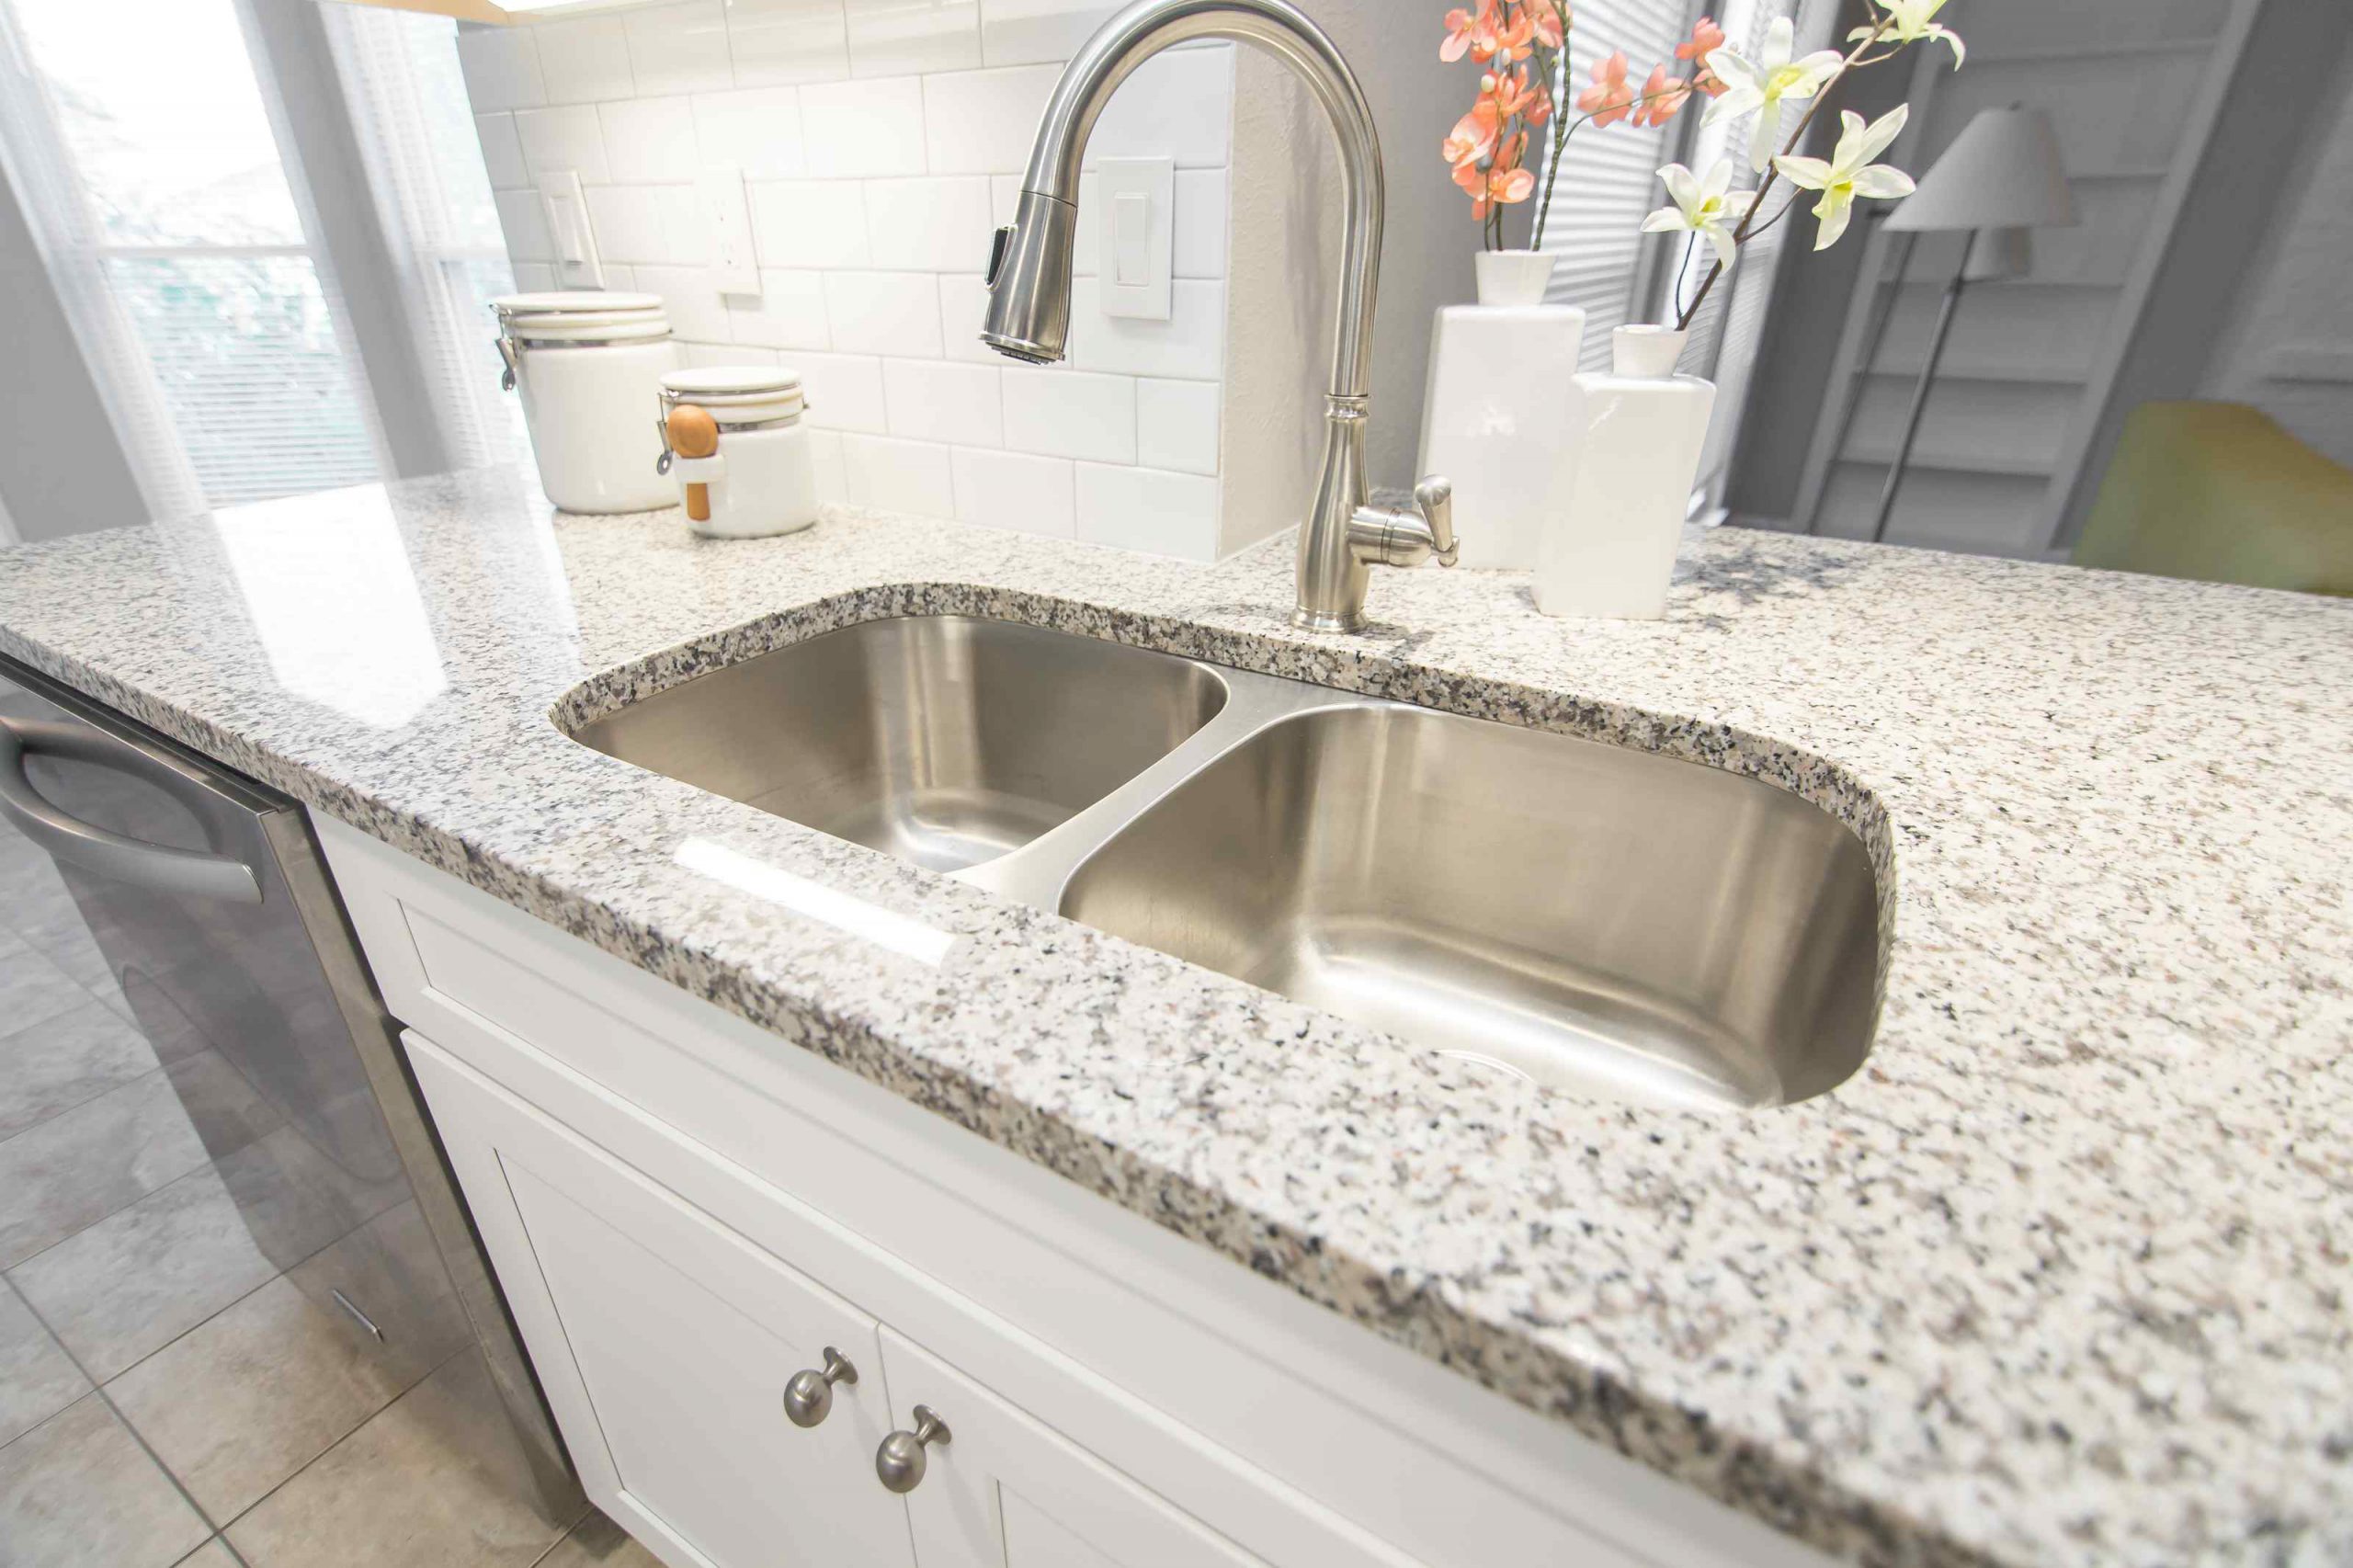 Grapevine kitchen with double sink remodel with quartz countertops